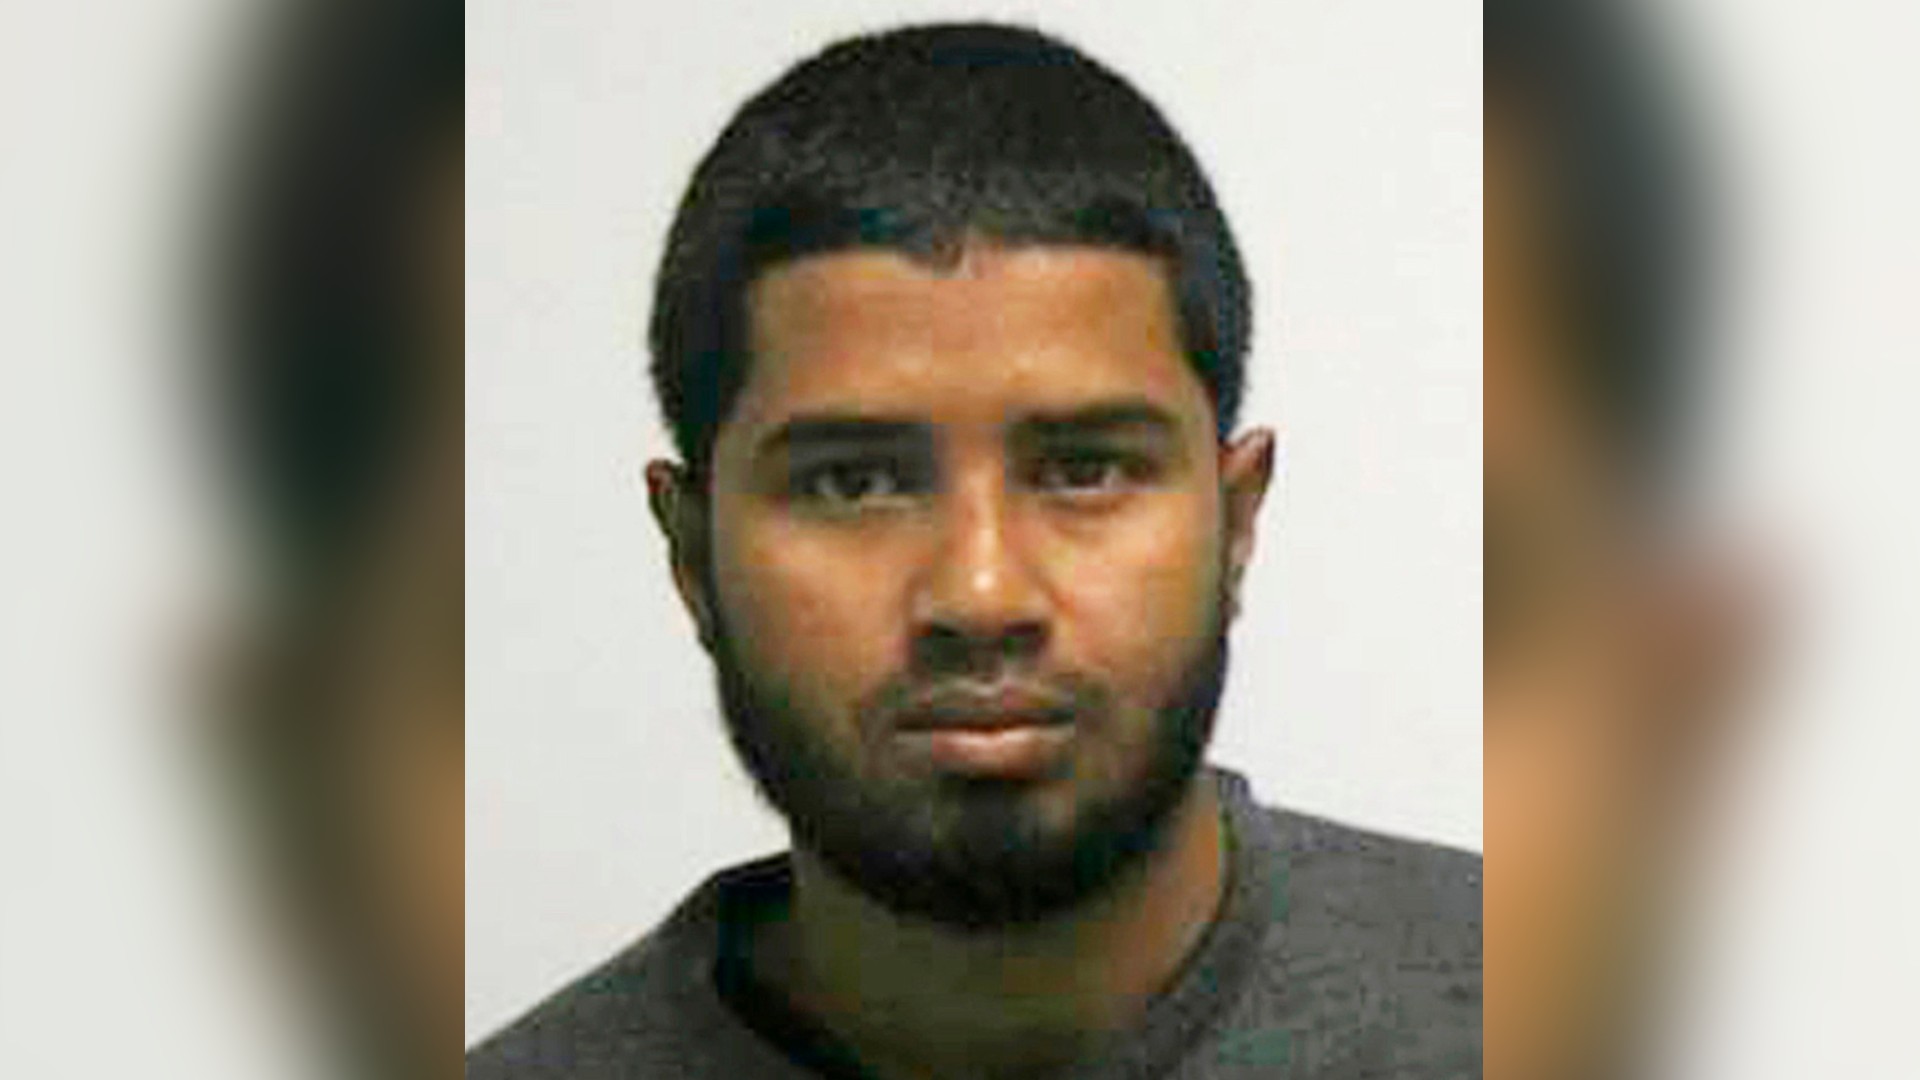 Prosecutors Seek Life Term for Would-Be NYC Suicide Bomber